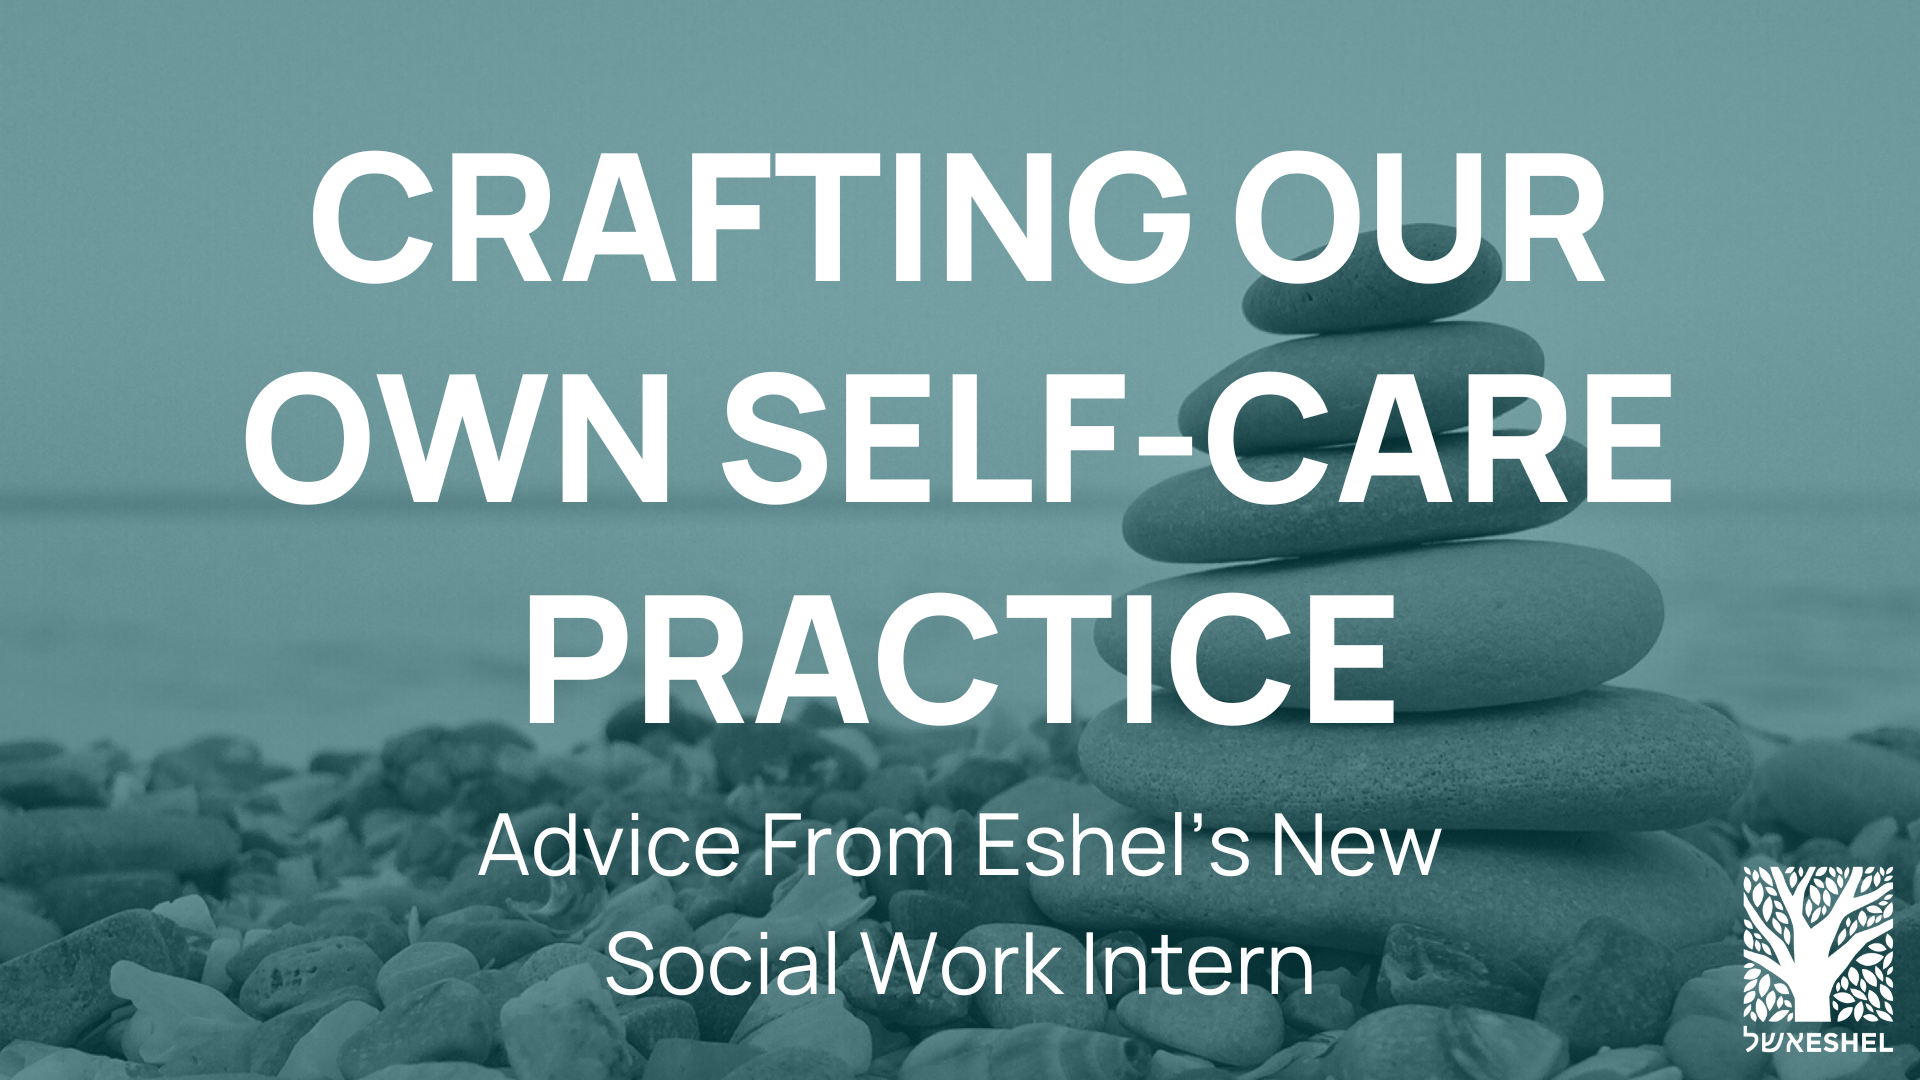 Crafting Our Own Self-Care Practice: advice from eshel's new social work intern